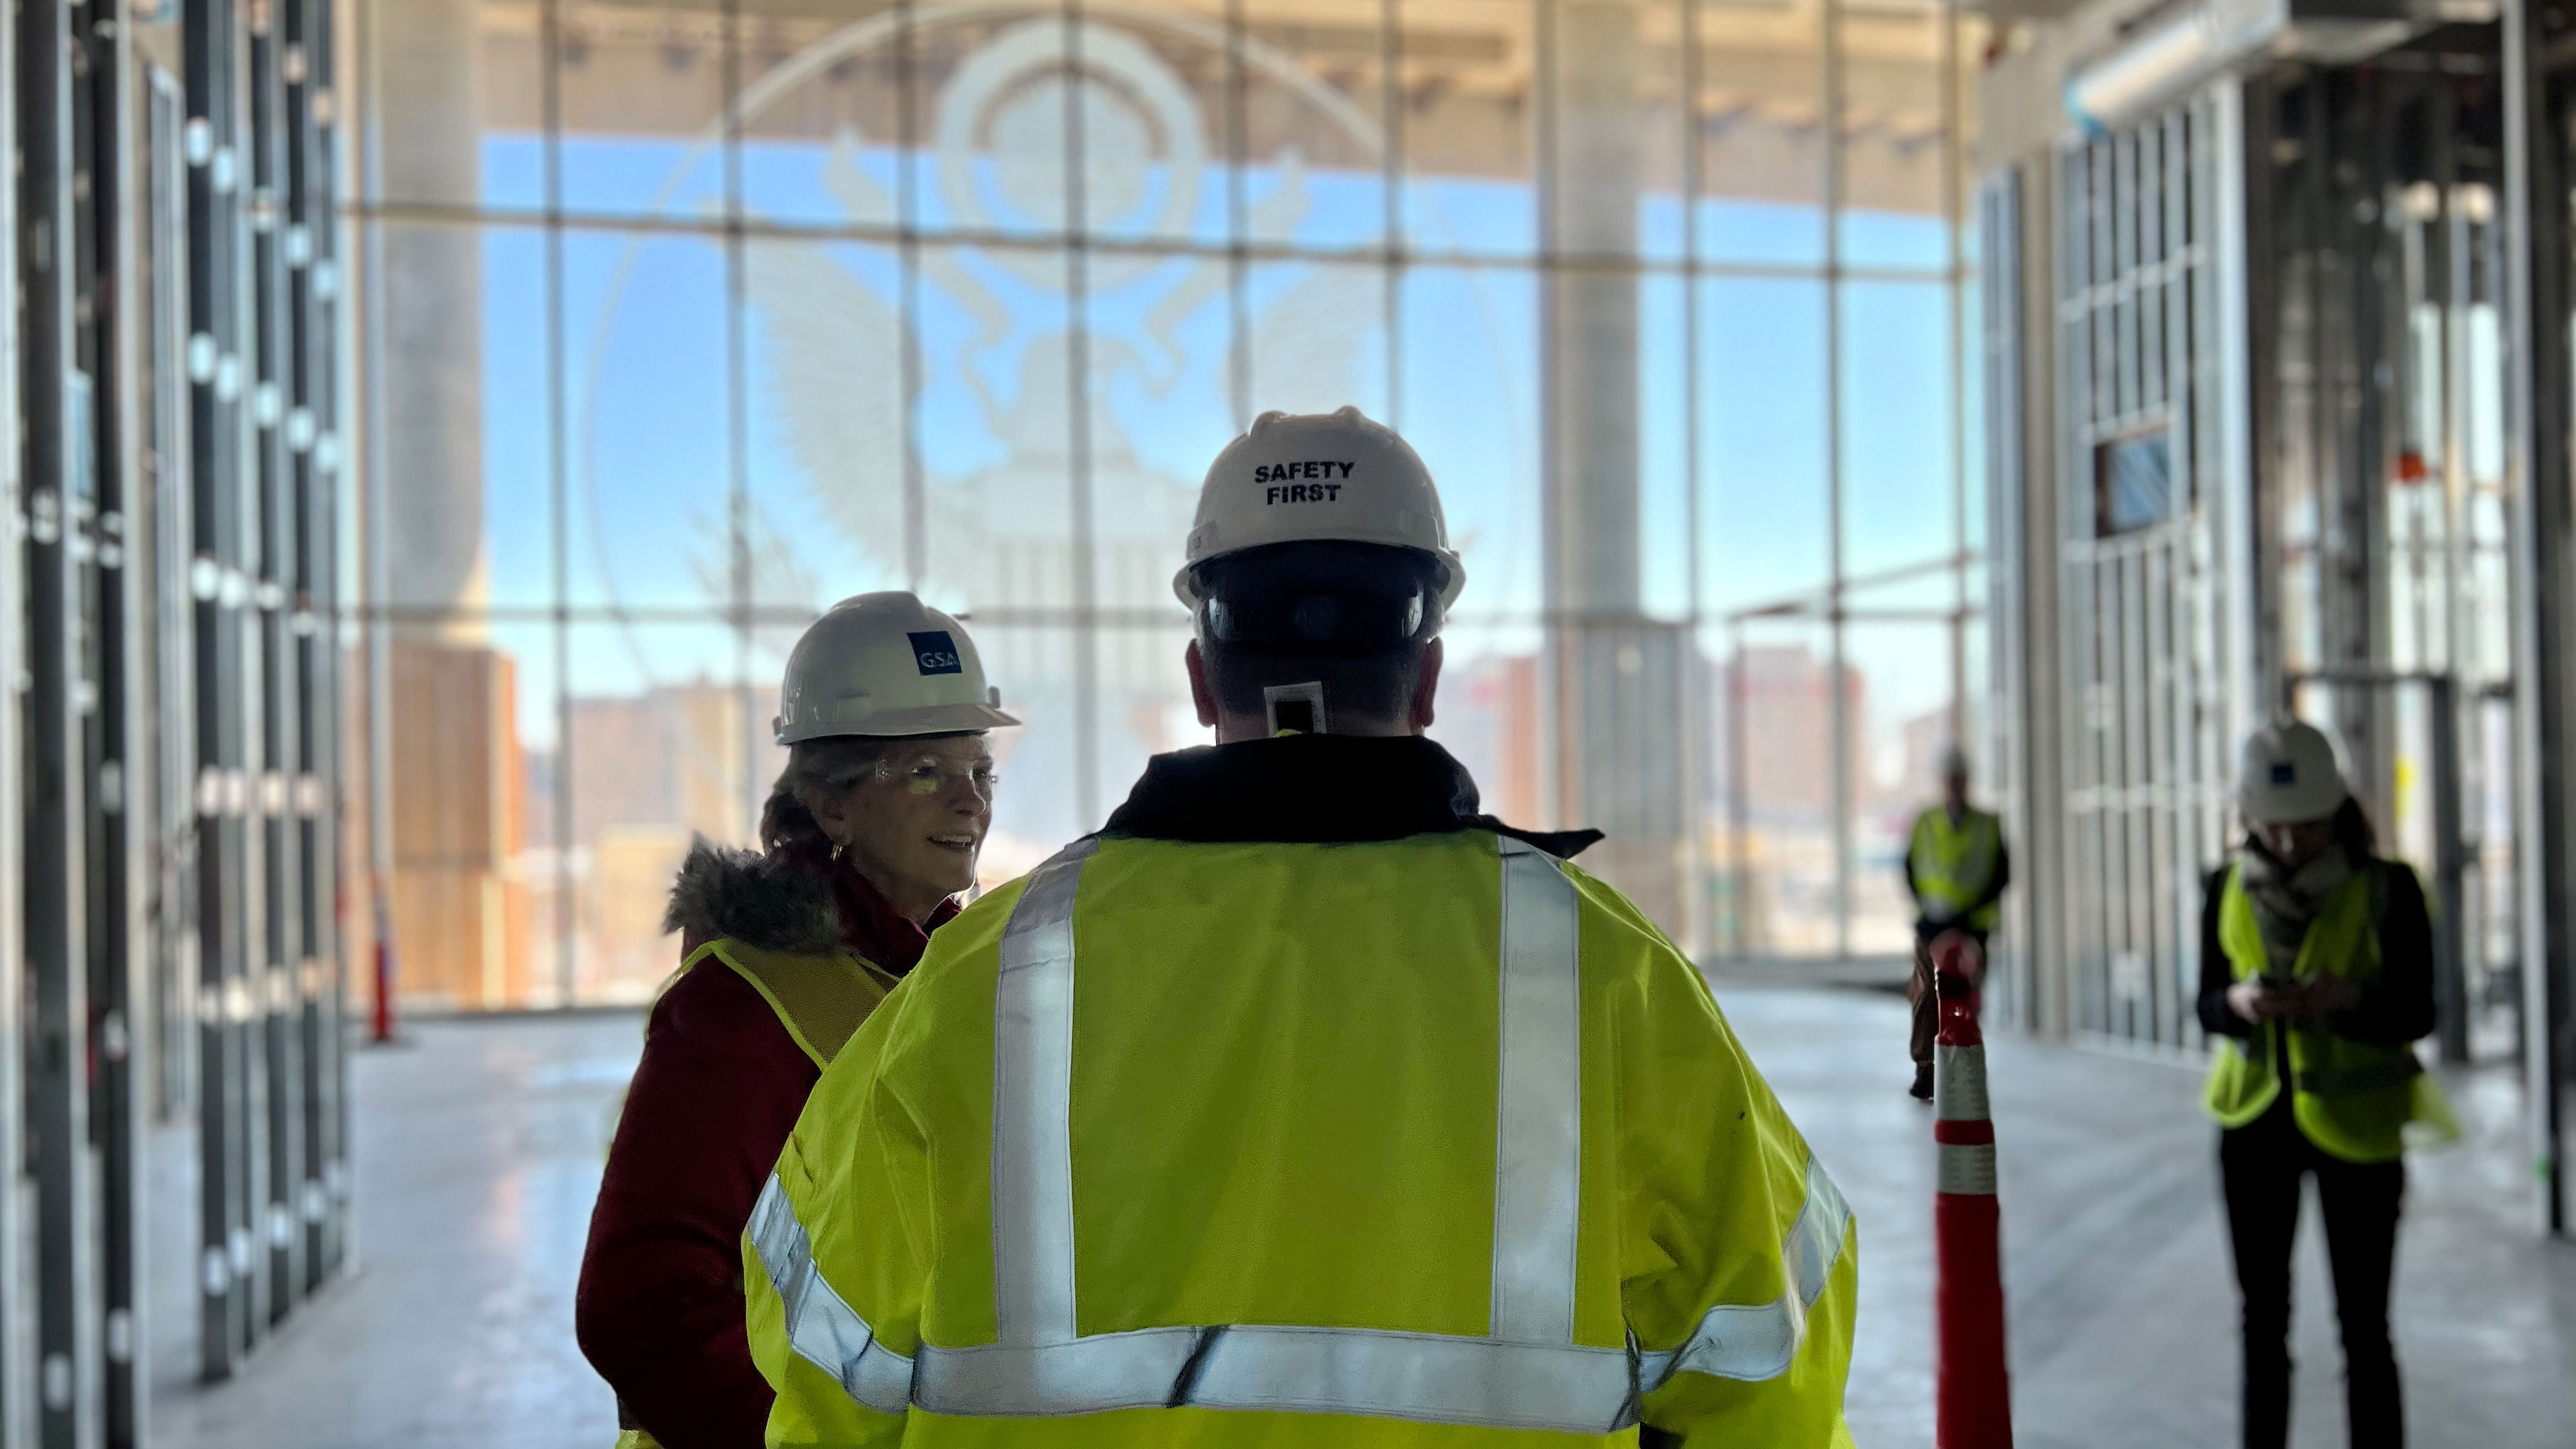 Two people wearing hard hats and safety vests stand inside a partially constructed building with a glass front wall and a U.S. seal etched in it.